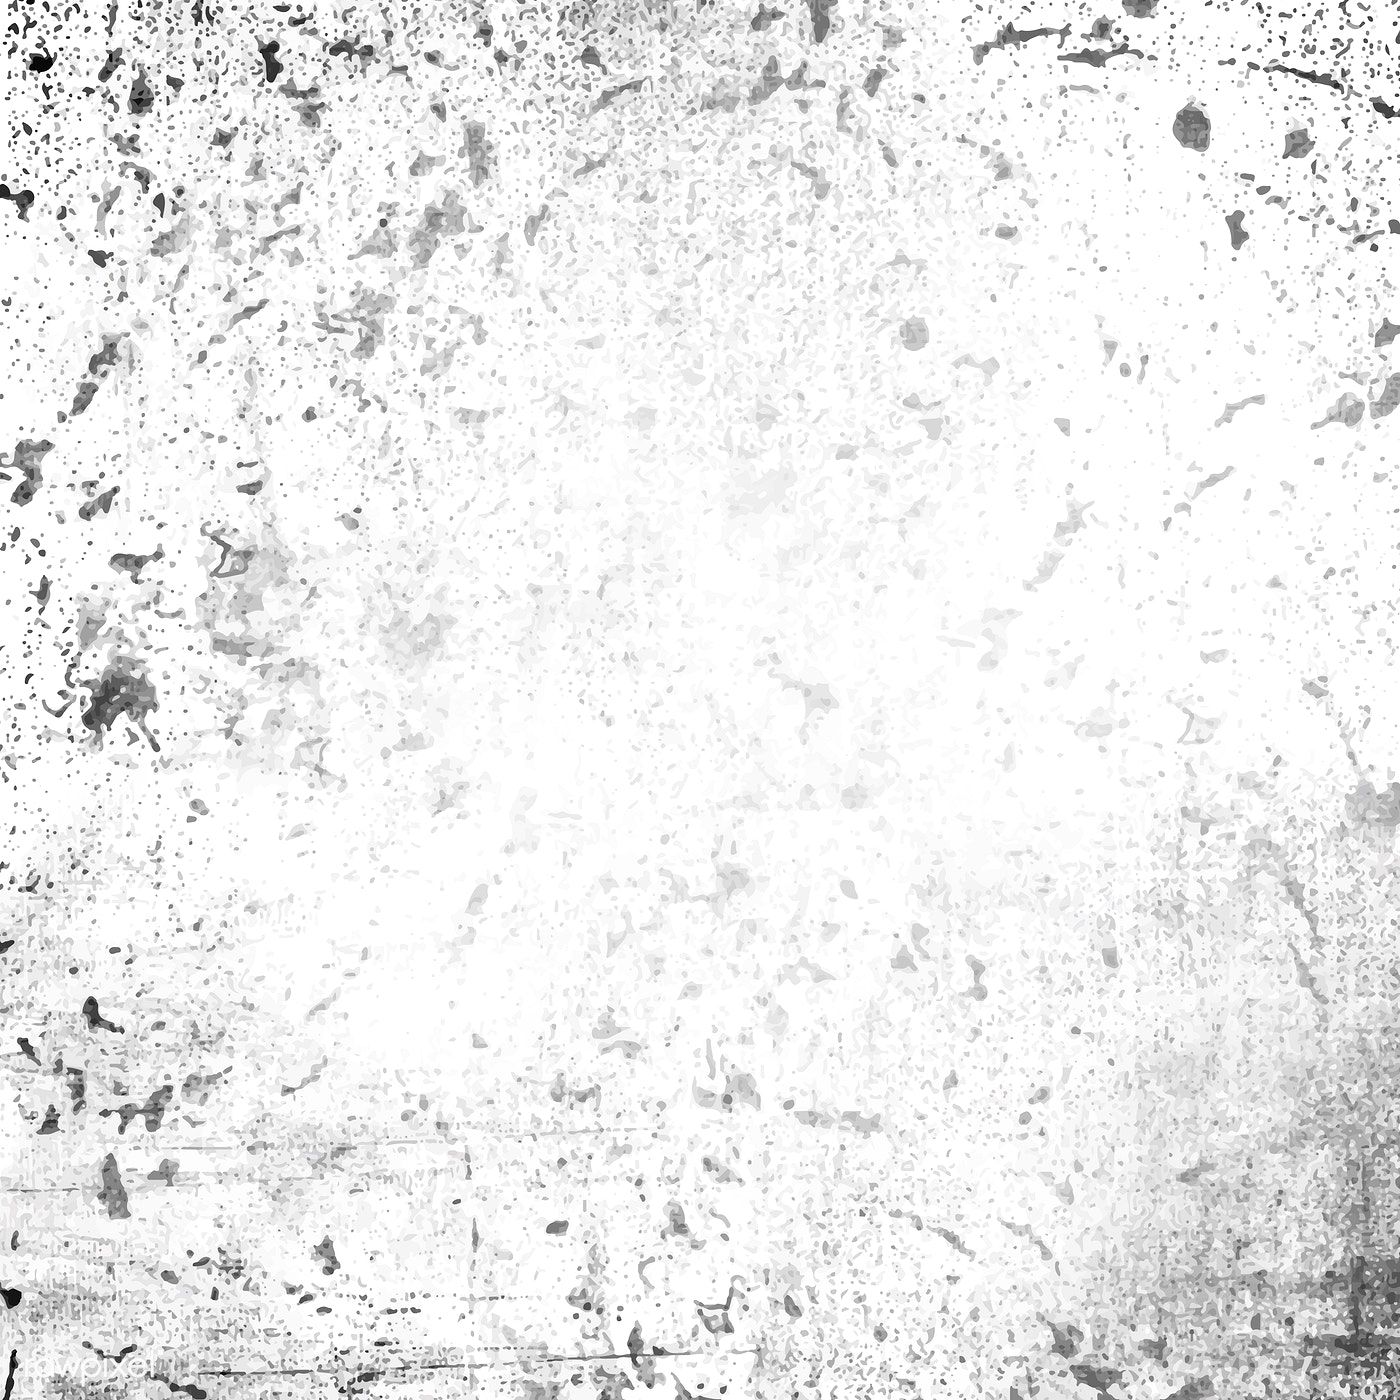 Distressed Texture Vector Free Download at Vectorified.com ...